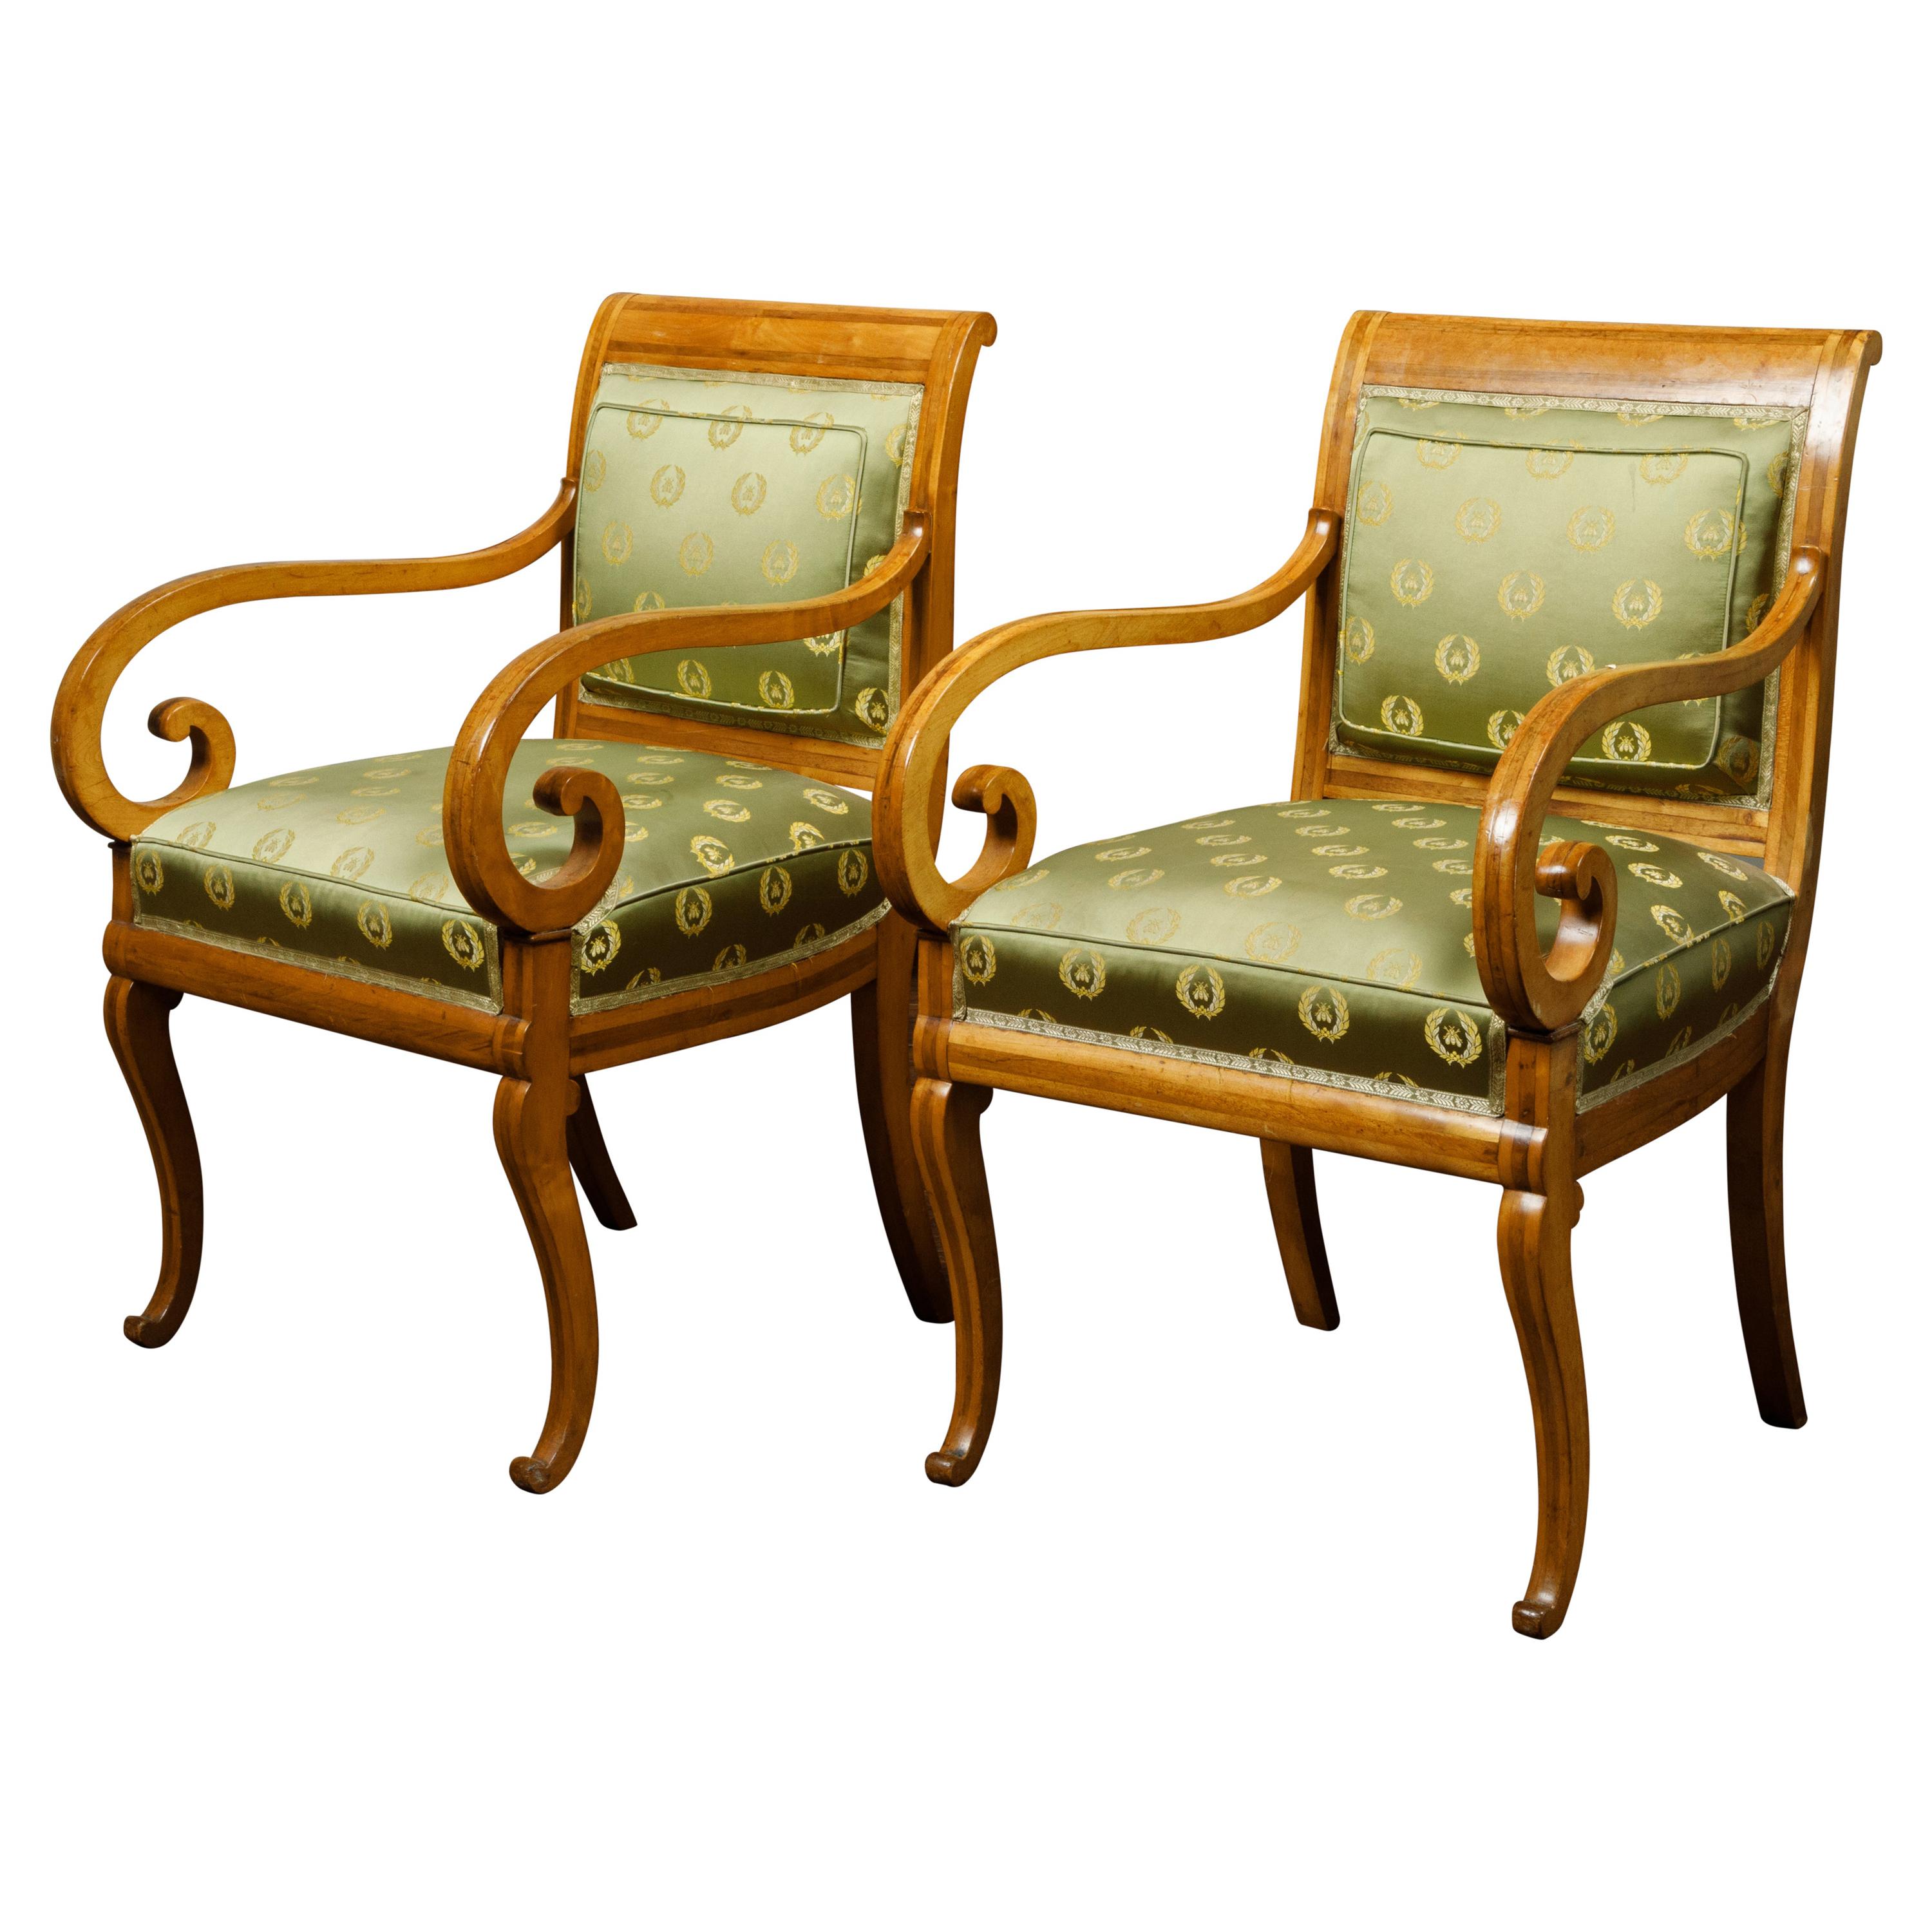 Pair of English 1830s Regency Walnut Upholstered Armchairs with Scrolling Arms For Sale